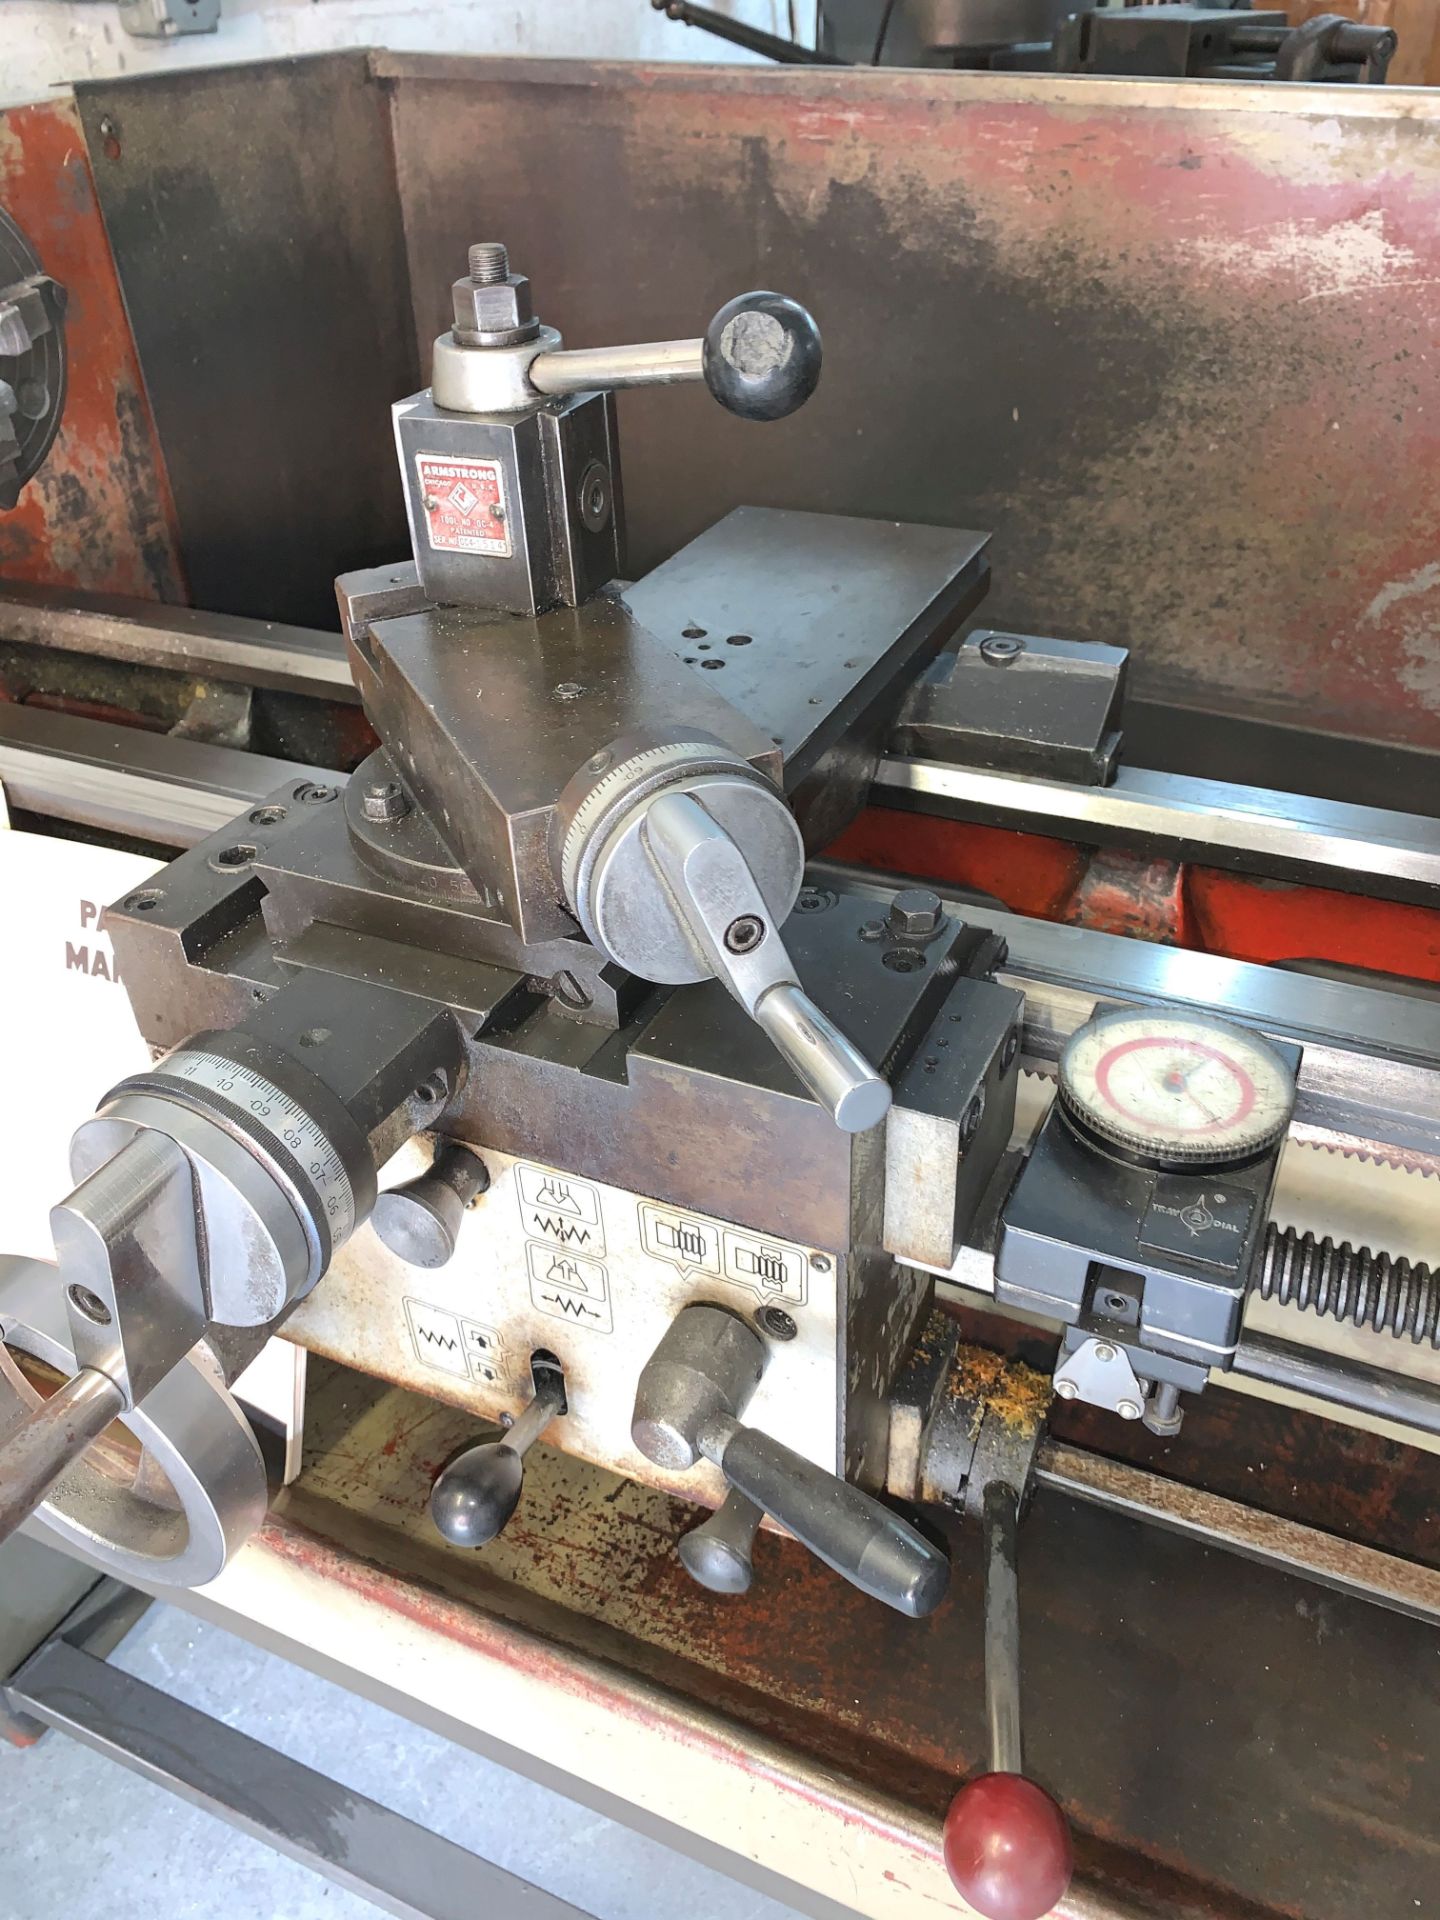 Do-Al 13" Center Lathe, 48" Bed, 4 & 3 Jaw Chucks, Steady Rest, Tool Post, Collets - Image 4 of 5